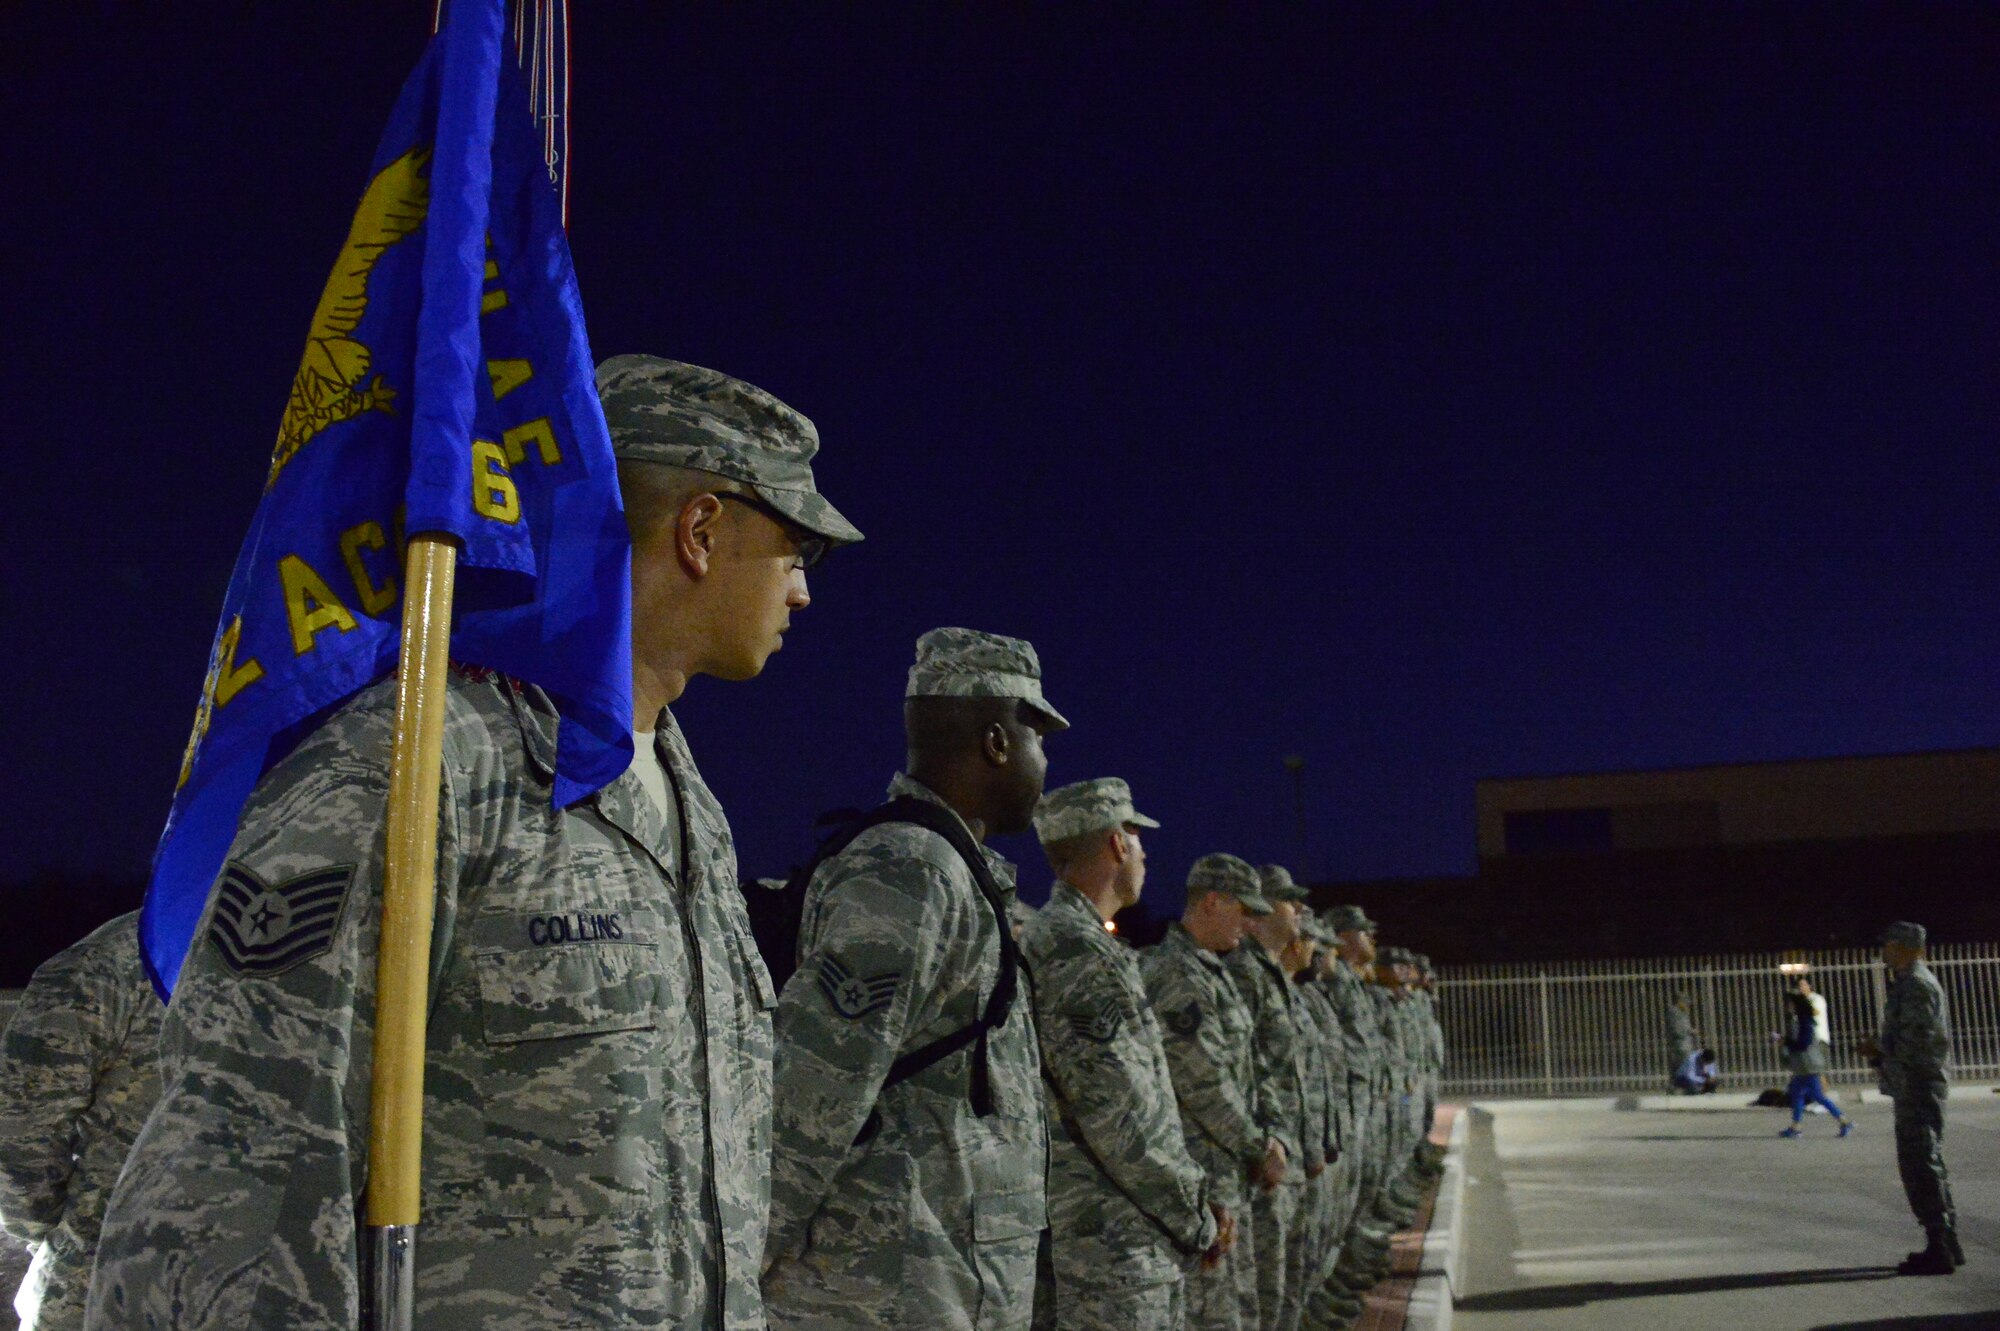 Members of the 612th Air Communication Squadron prepare to march around Davis-Monthan AFB, Ariz., in remembrance of the 9/11 victims, Sept. 11, 2014. As members marched they recalled where they were during the attacks. (USAF photo by Staff Sgt. Heather Redman/Released)